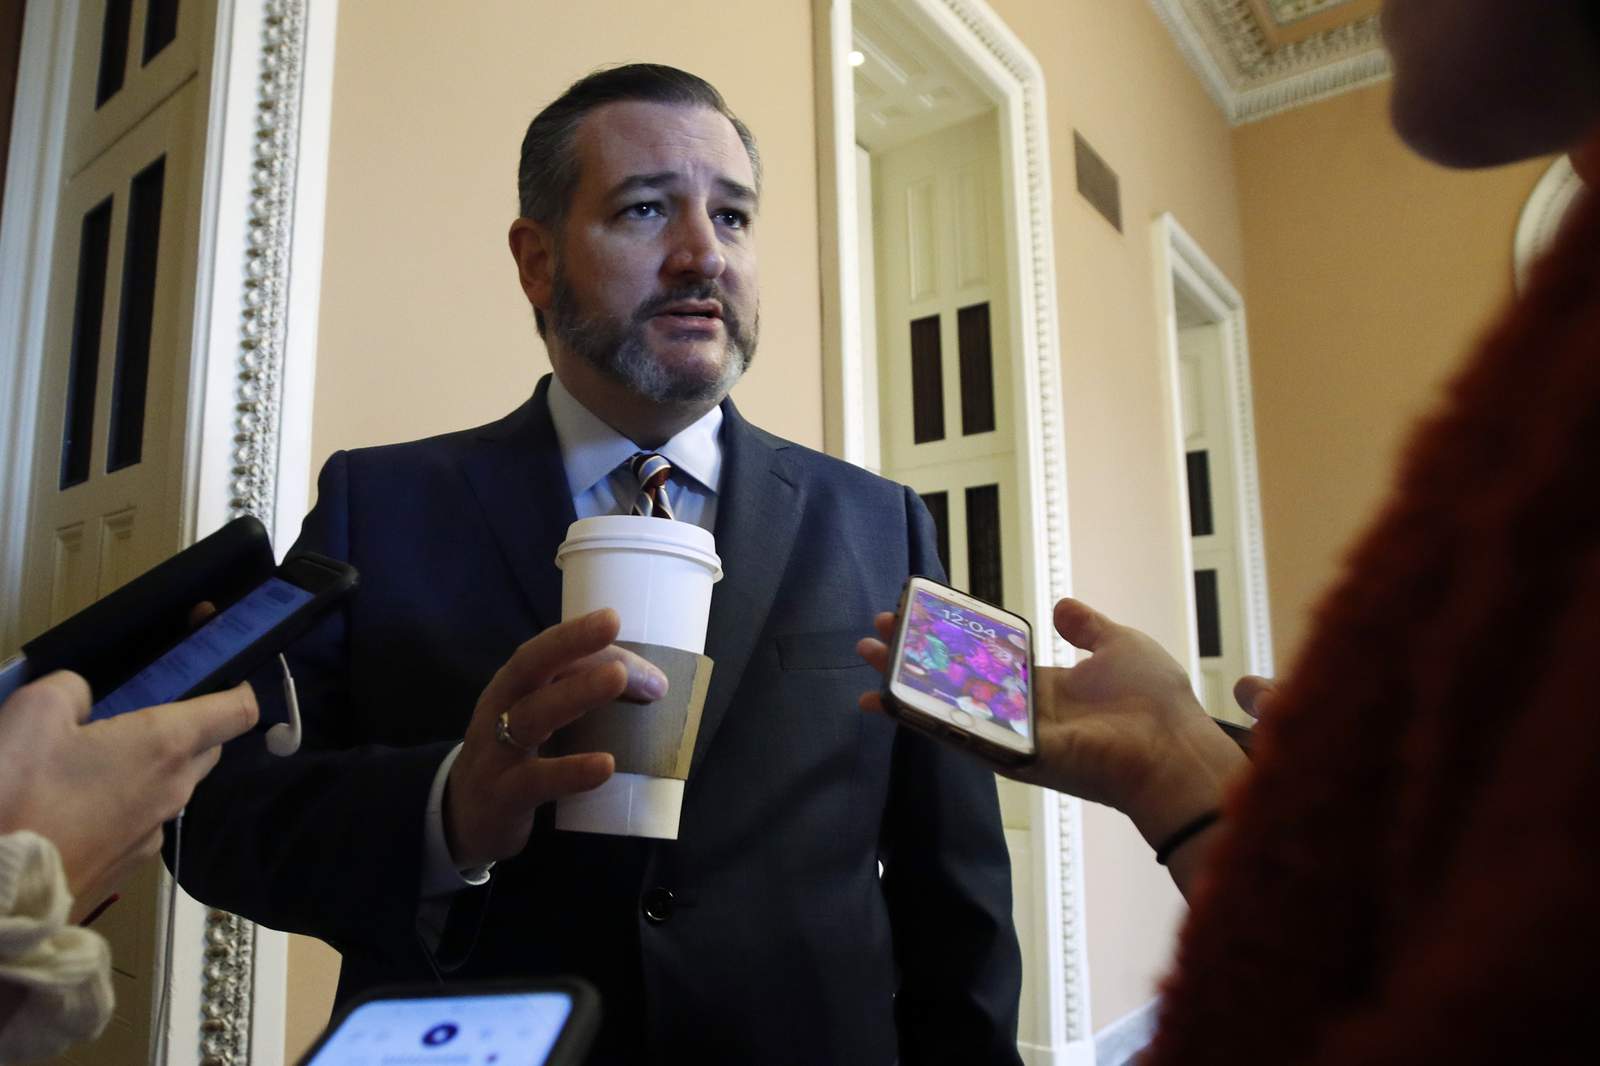 Sen. Ted Cruz extends self-quarantine after interacting with another COVID-19 patient